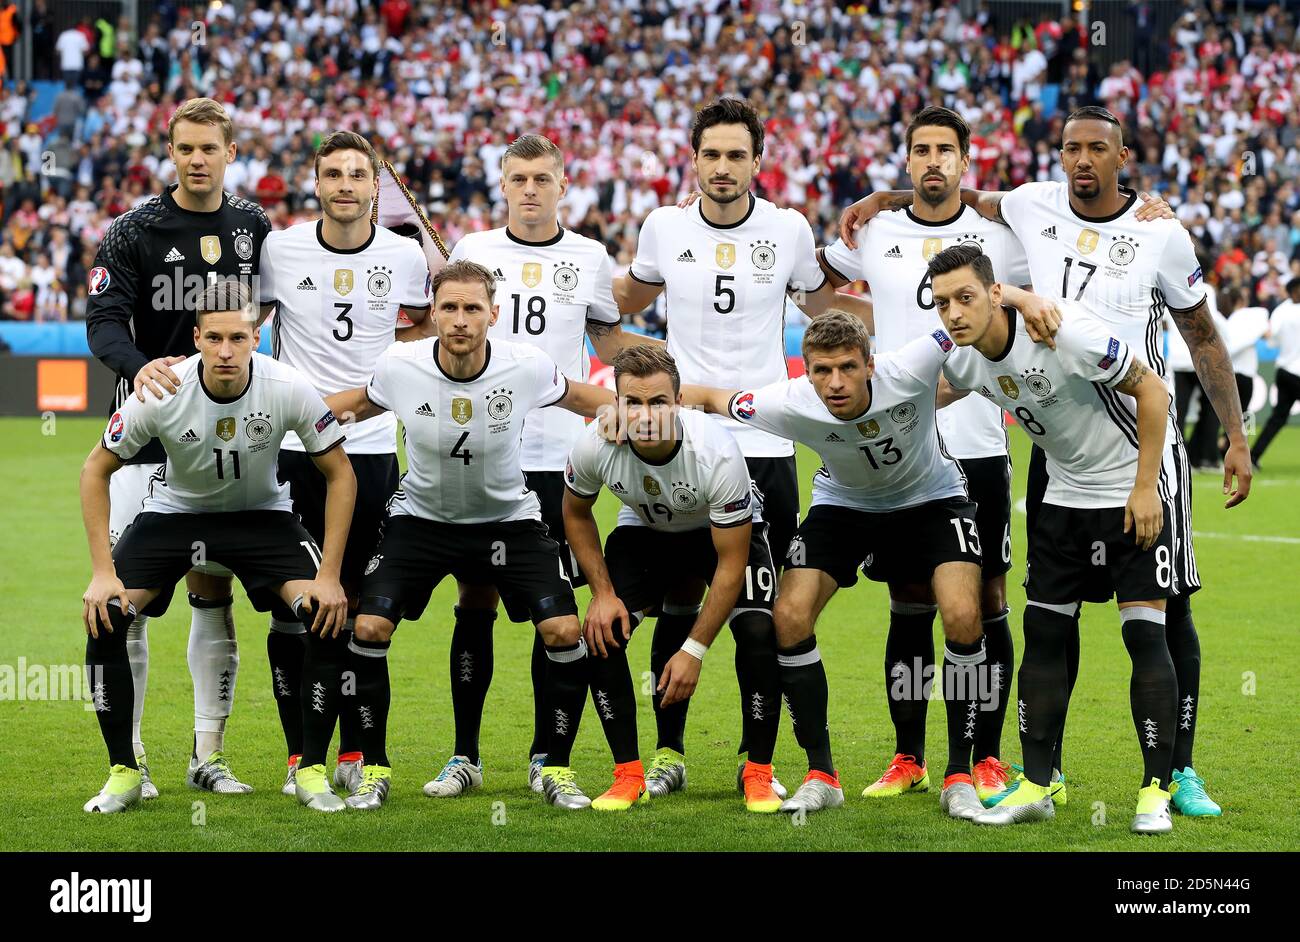 Germany players pose for a team photograph before kick-off Stock Photo